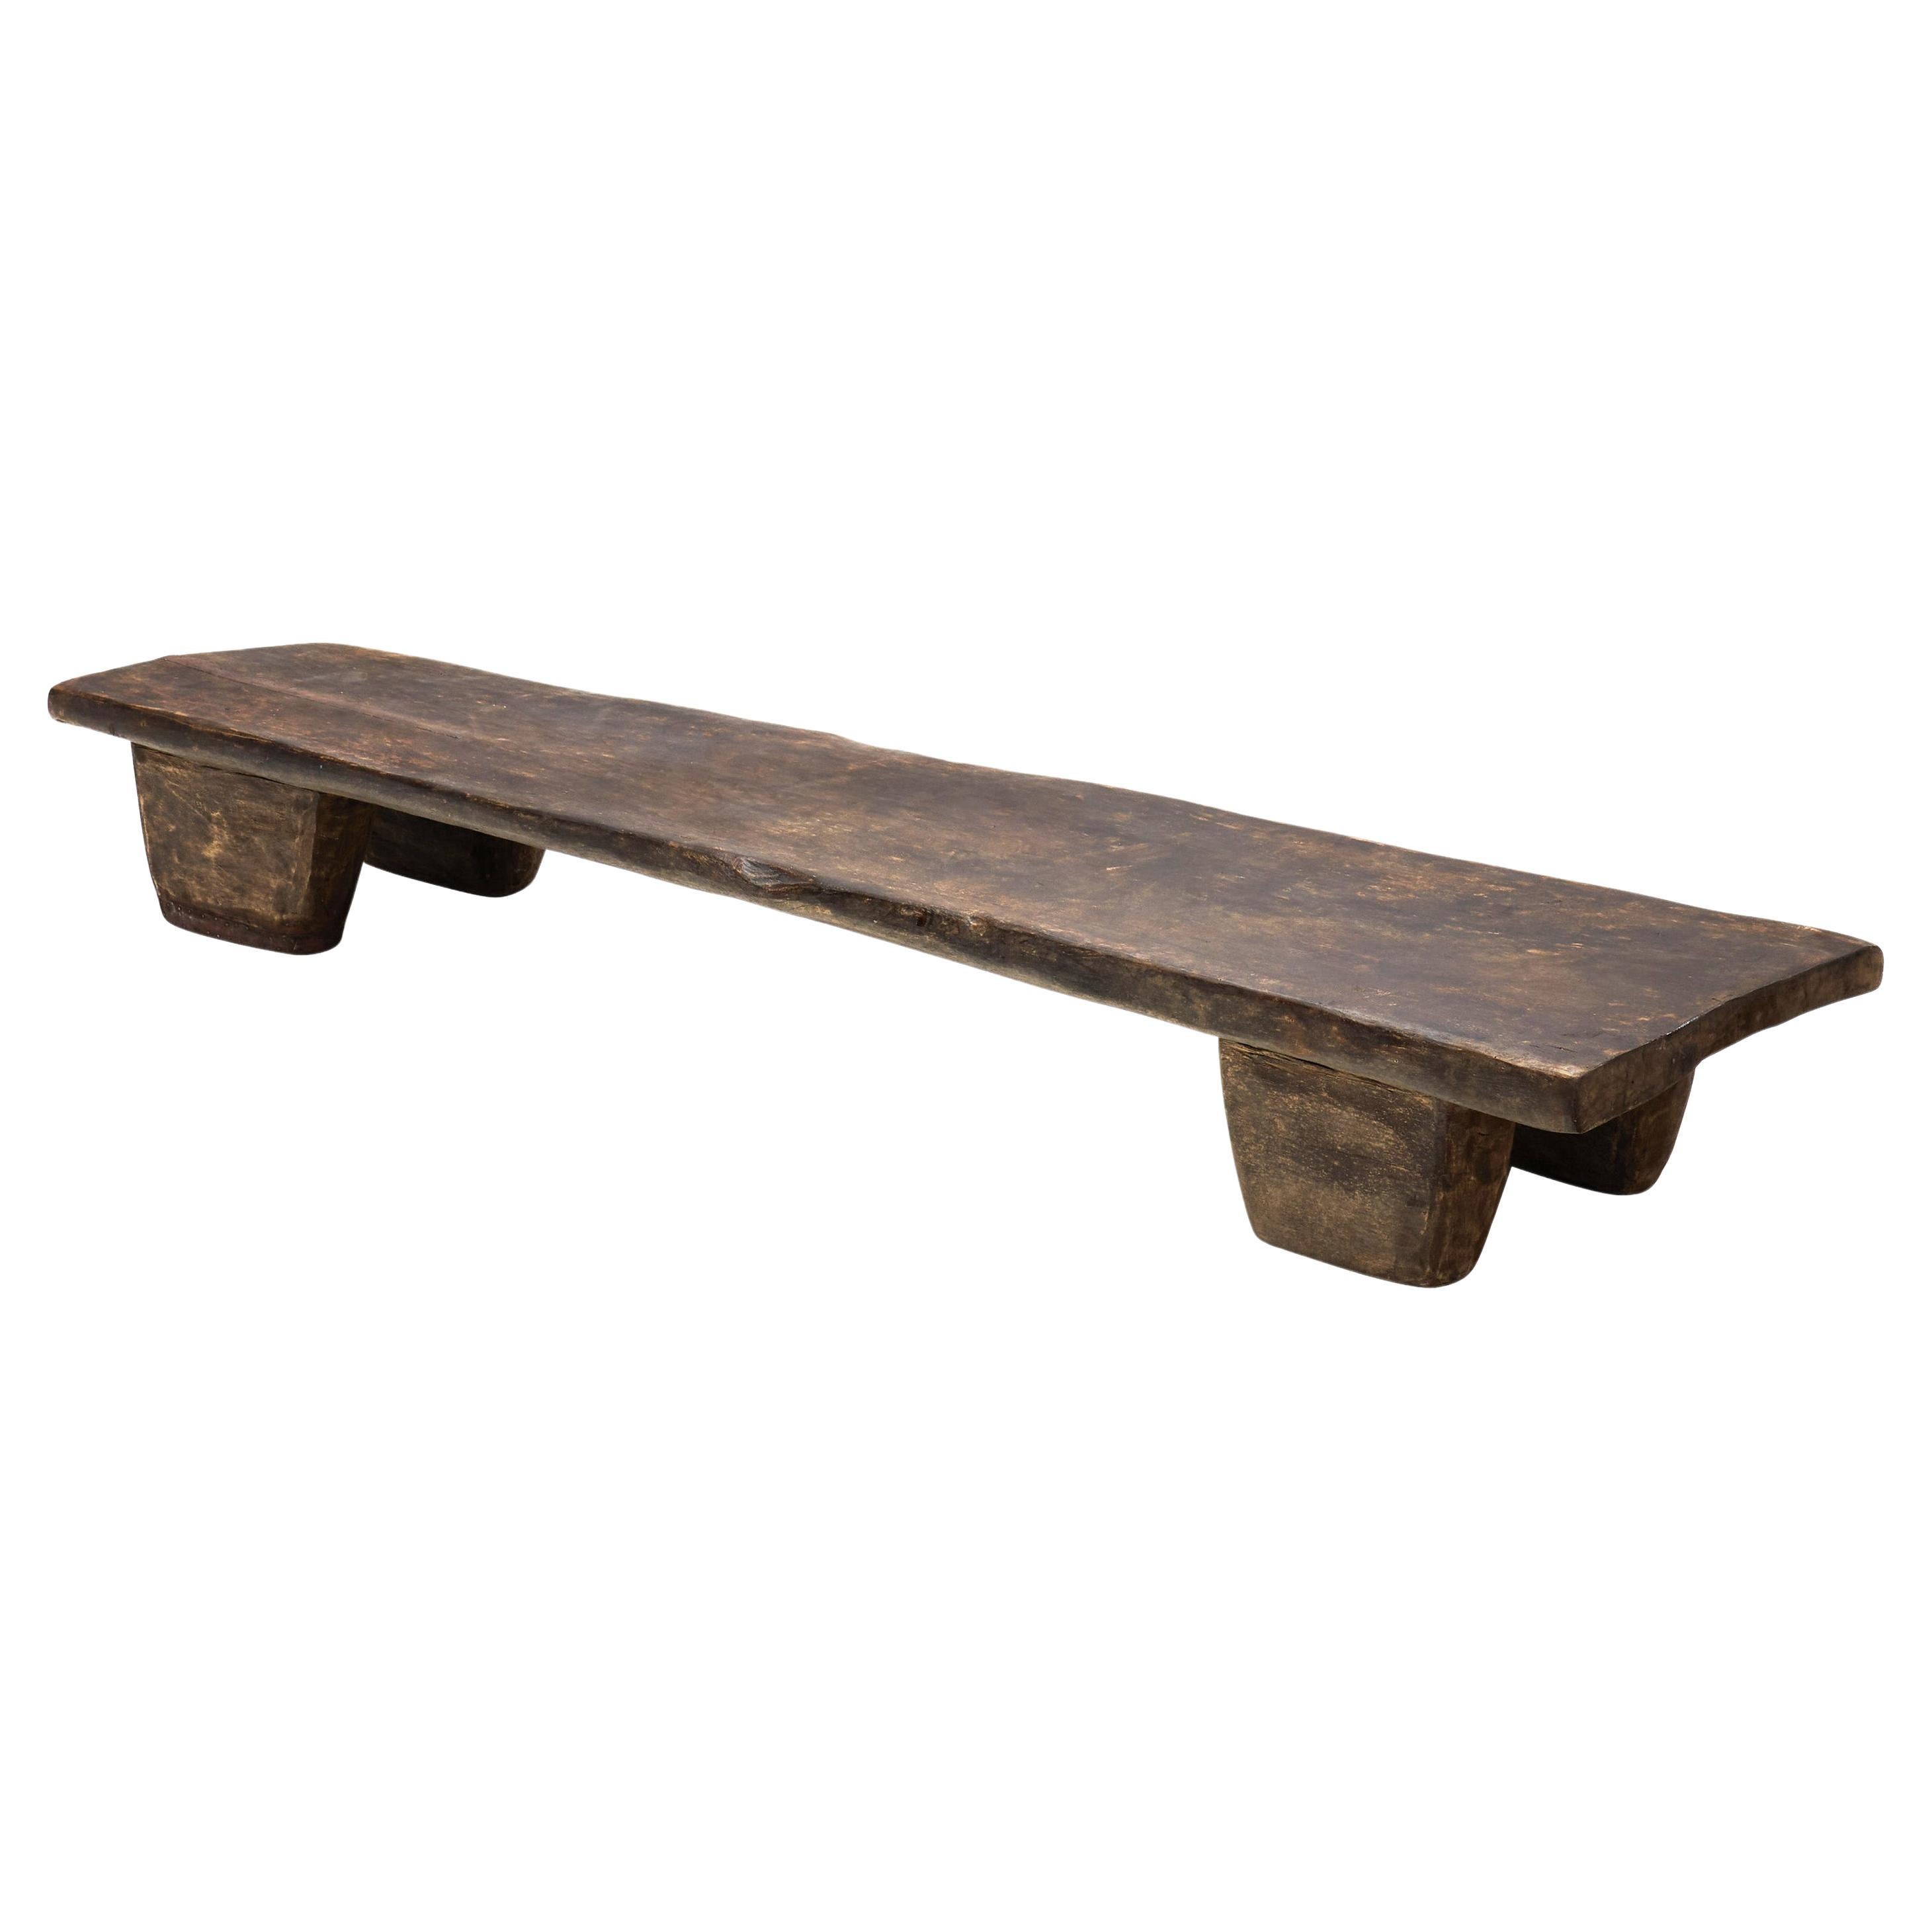 Rustic Solid Wood Naga Coffee Table, India Early 20th Century For Sale